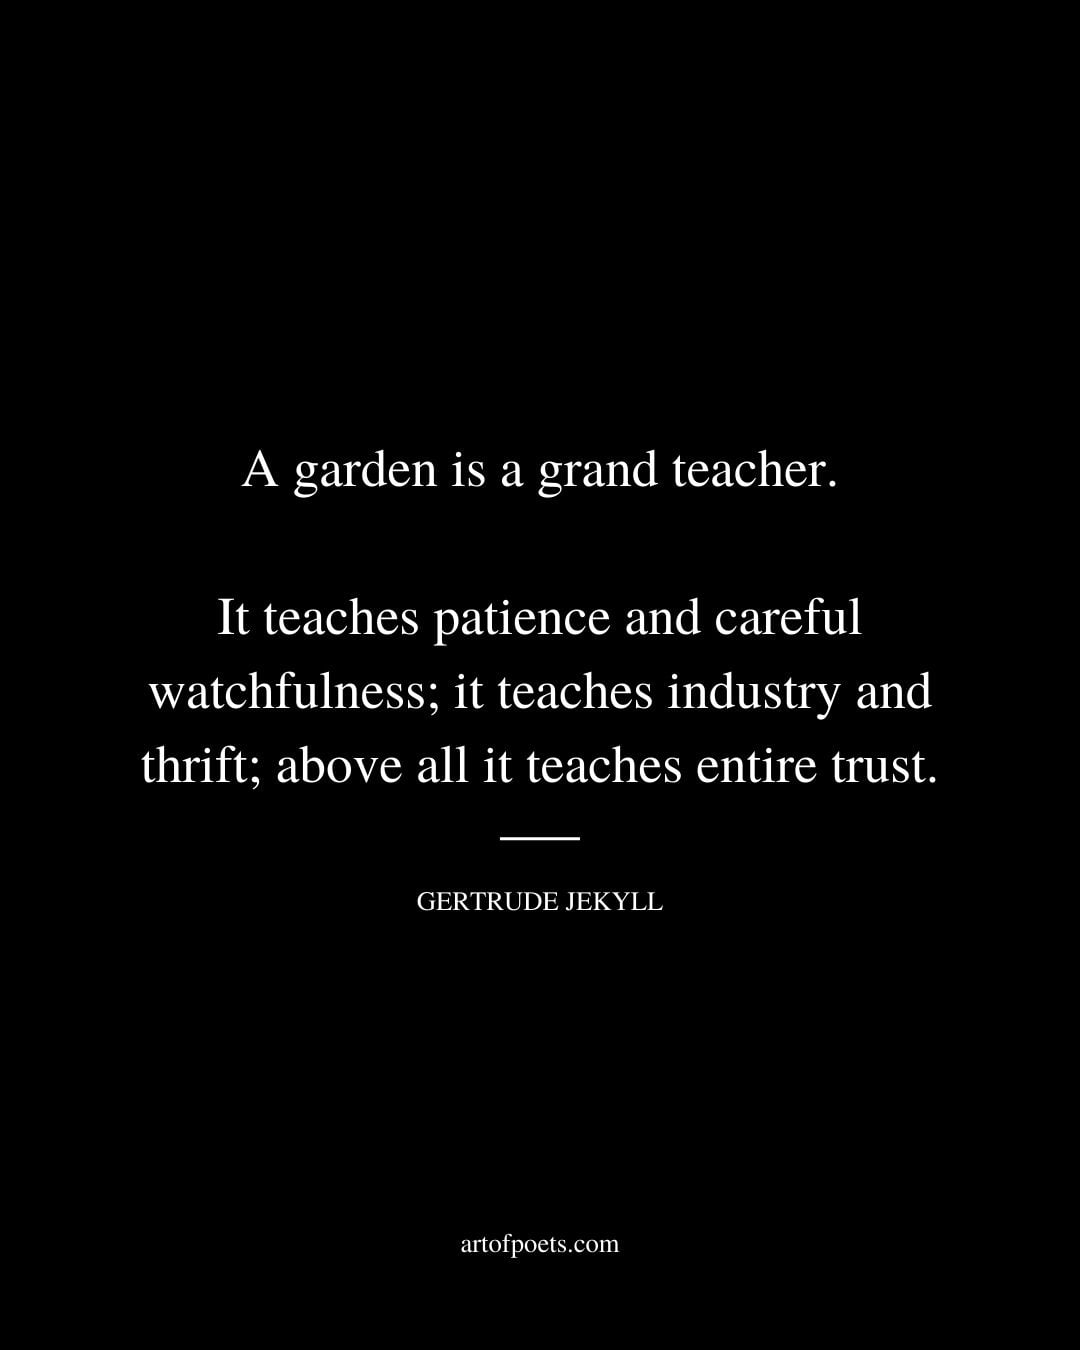 A garden is a grand teacher. It teaches patience and careful watchfulness it teaches industry and thrift above all it teaches entire trust. Gertrude Jekyll